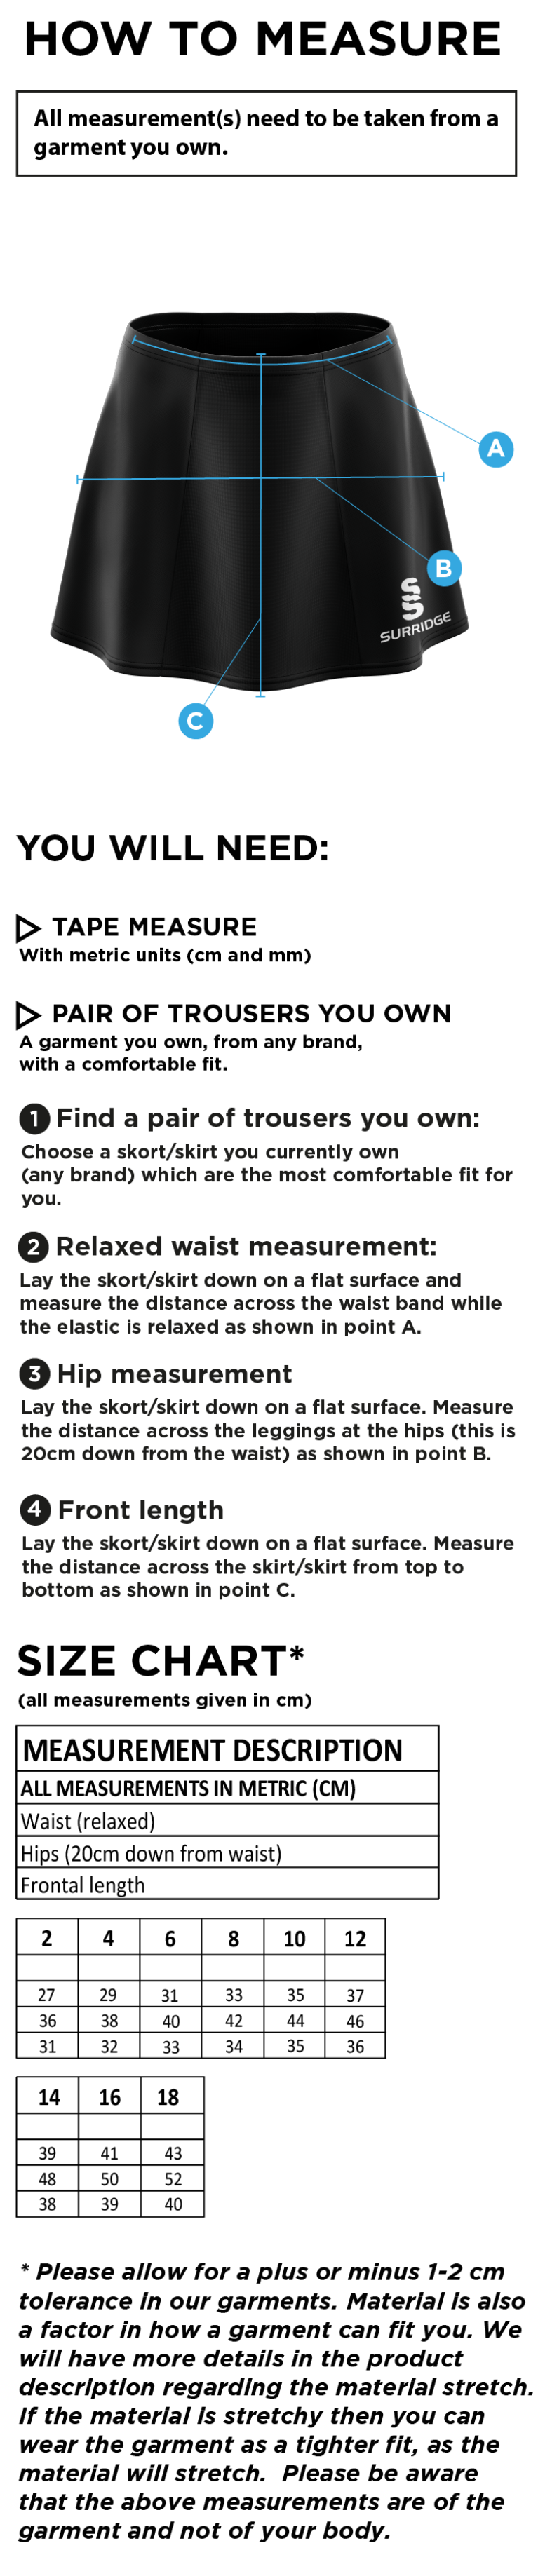 Rounders England - SKORT - Size Guide